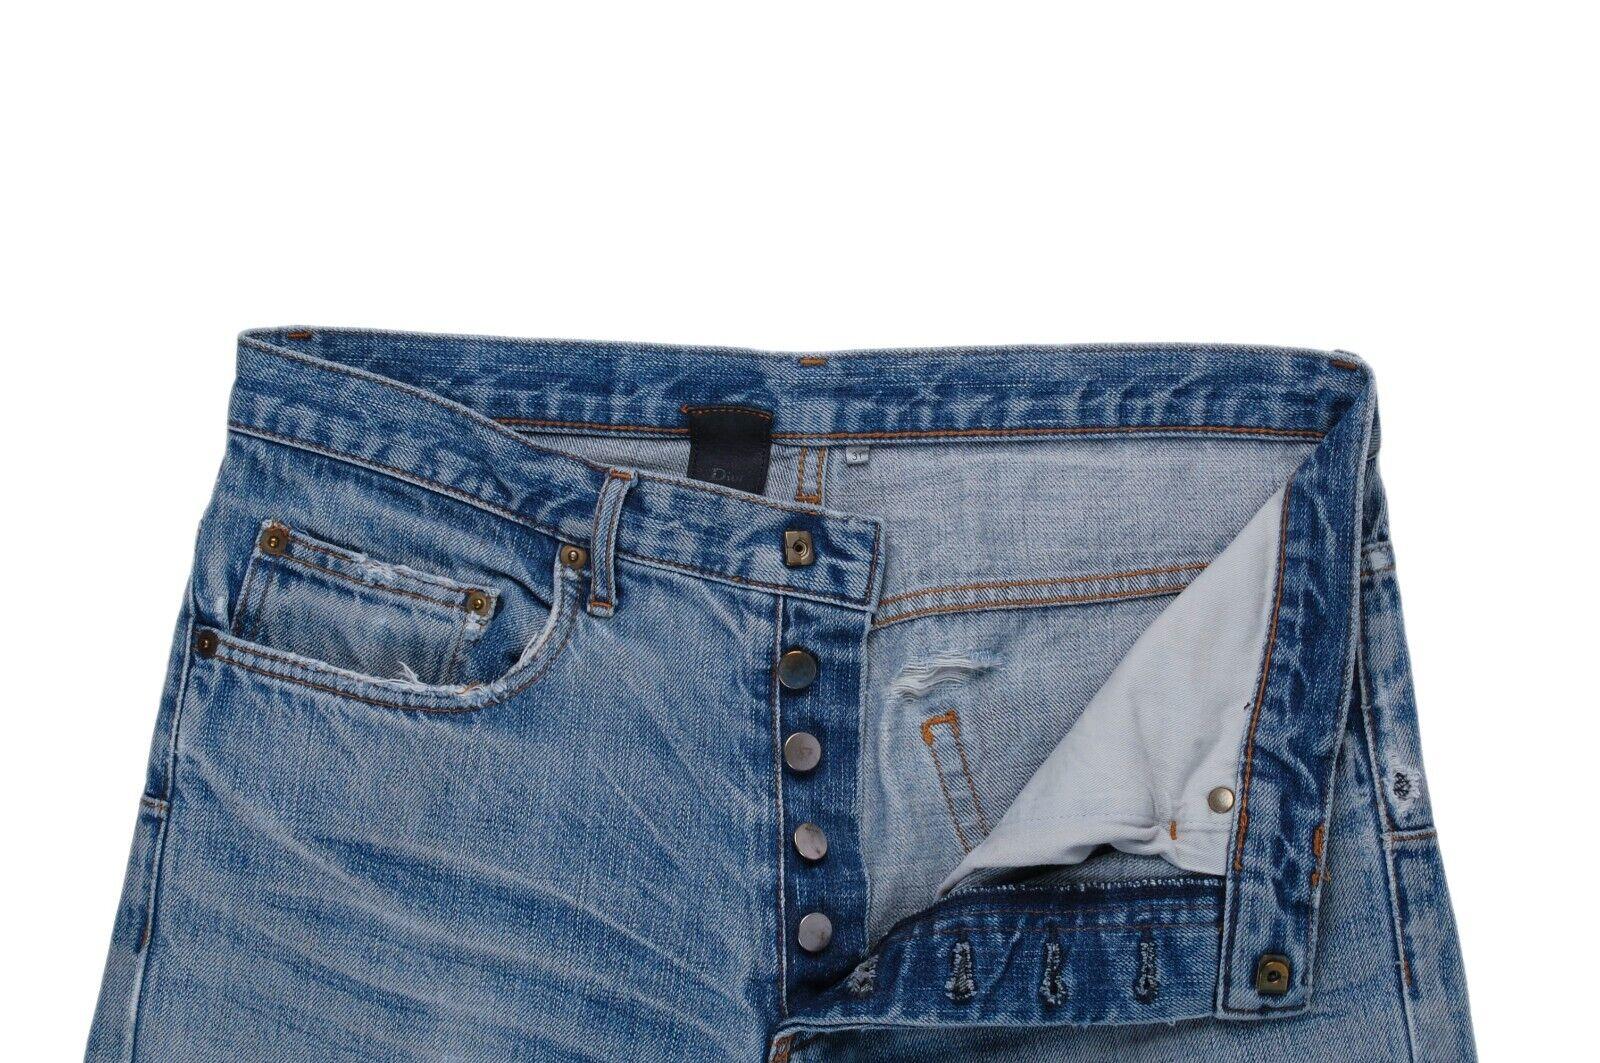 Item for sale is 100% genuine Dior Homme Jeans by Hedi Slimane
Color: Light Blue/Distressed
(An actual color may a bit vary due to individual computer screen interpretation)
Material: 100% cotton
Tag size: 31
These jeans are great quality item. Rate